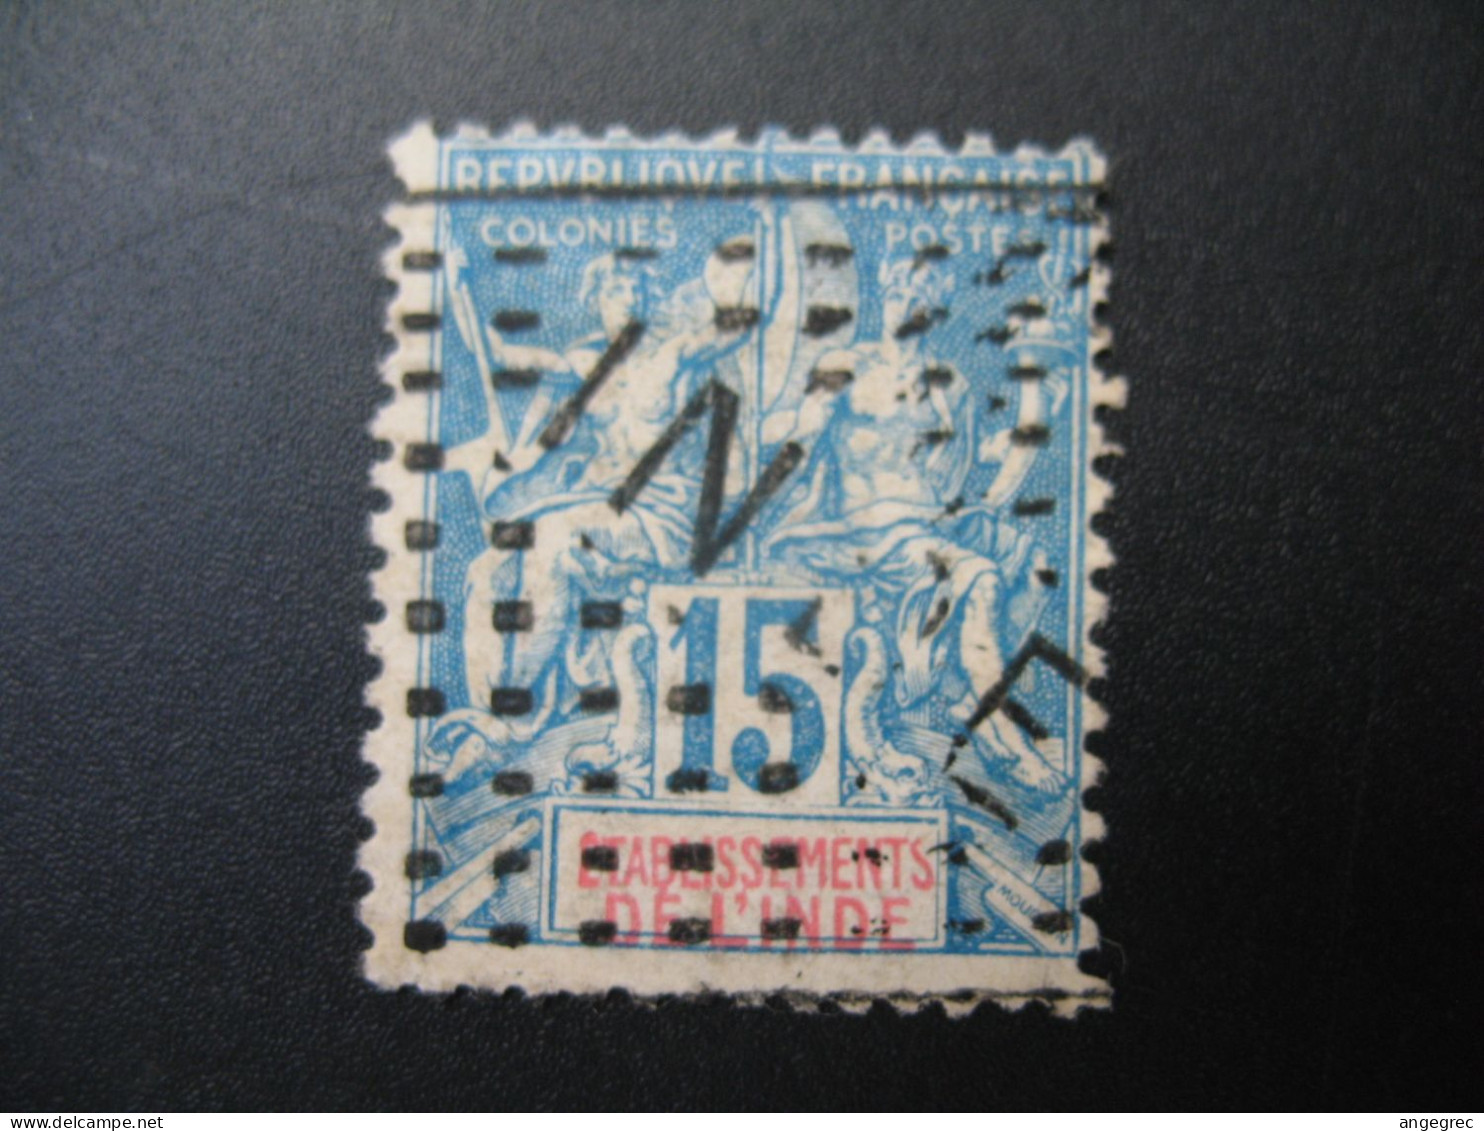 Inde Française Karikal Stamps French Colonies N° 6 Neuf * NSG Maury à Voir - Usati